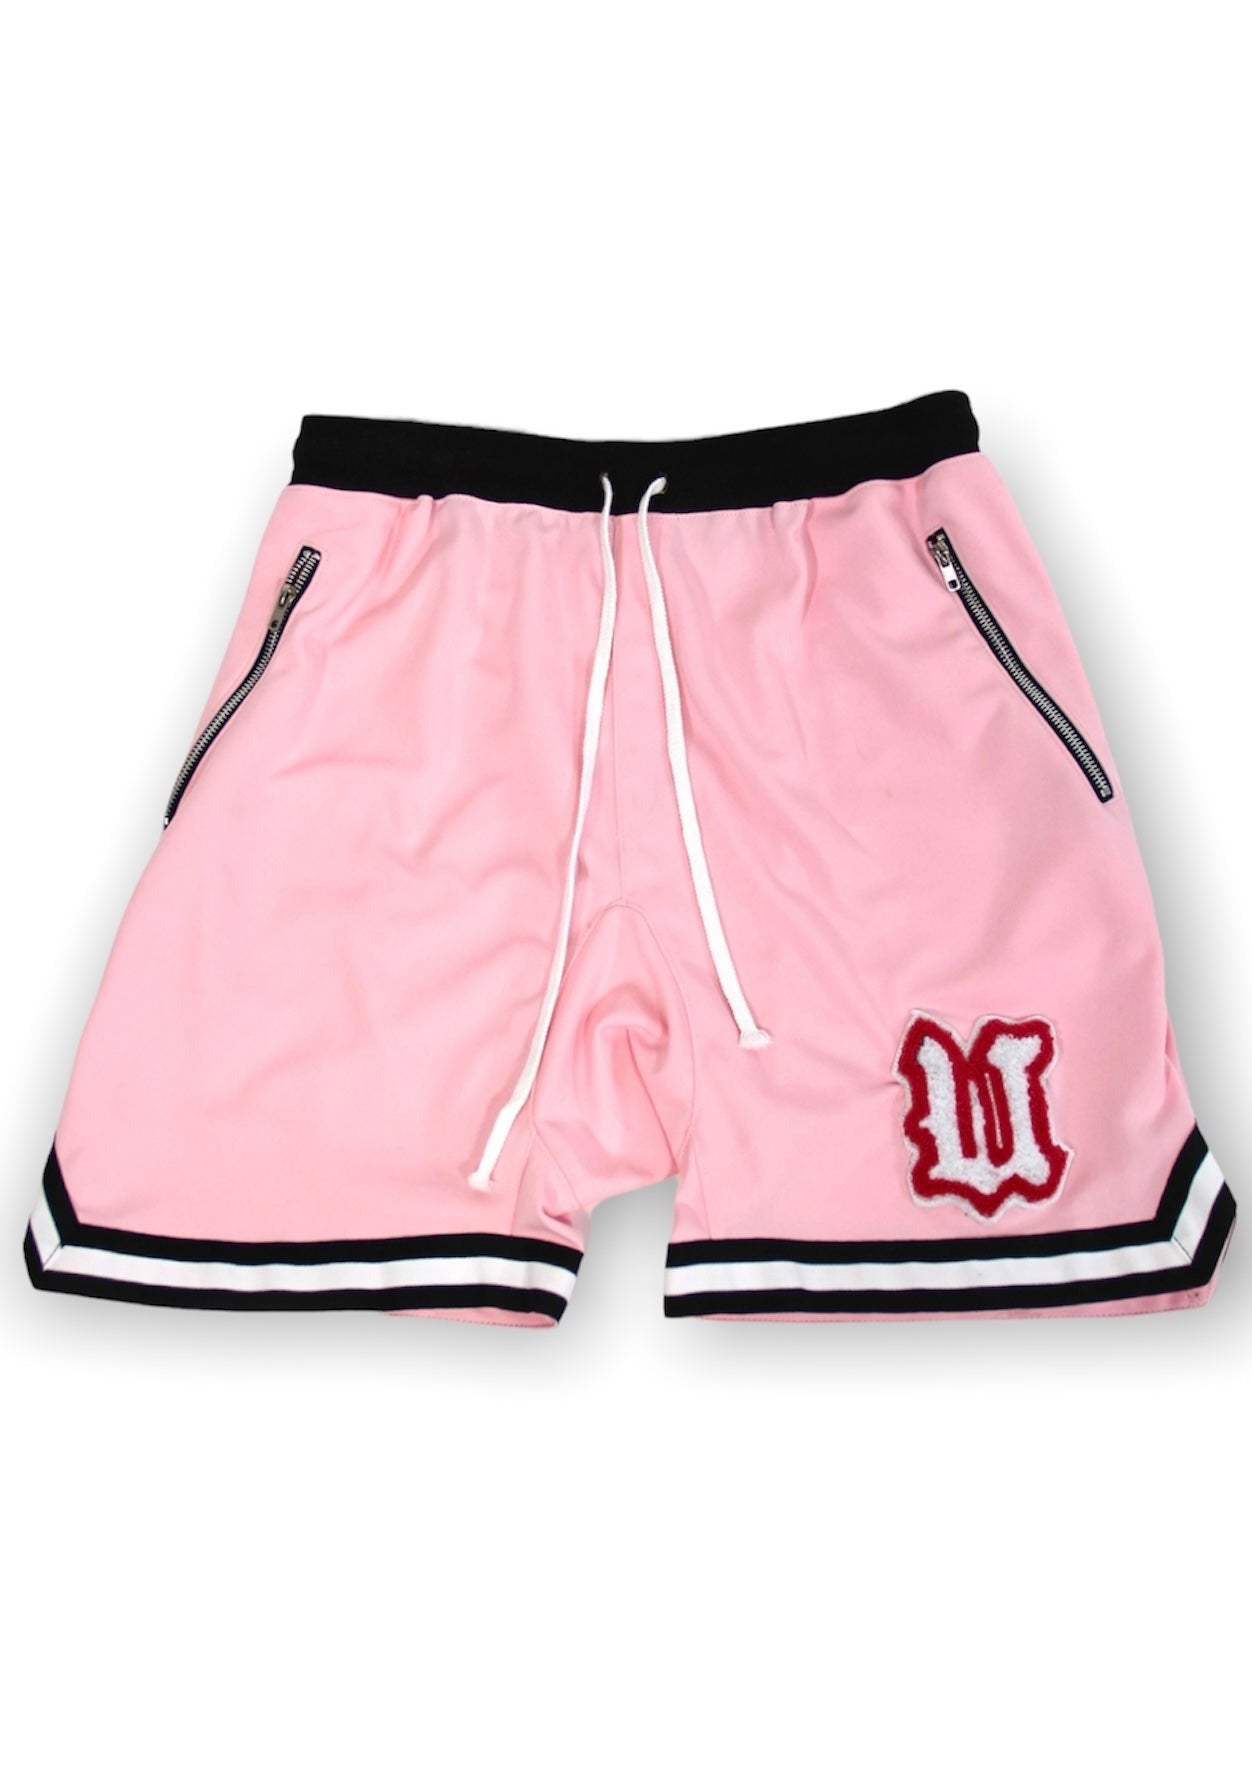 4 New JG Chenille Logo Mesh Basketball Shorts Featuring Our